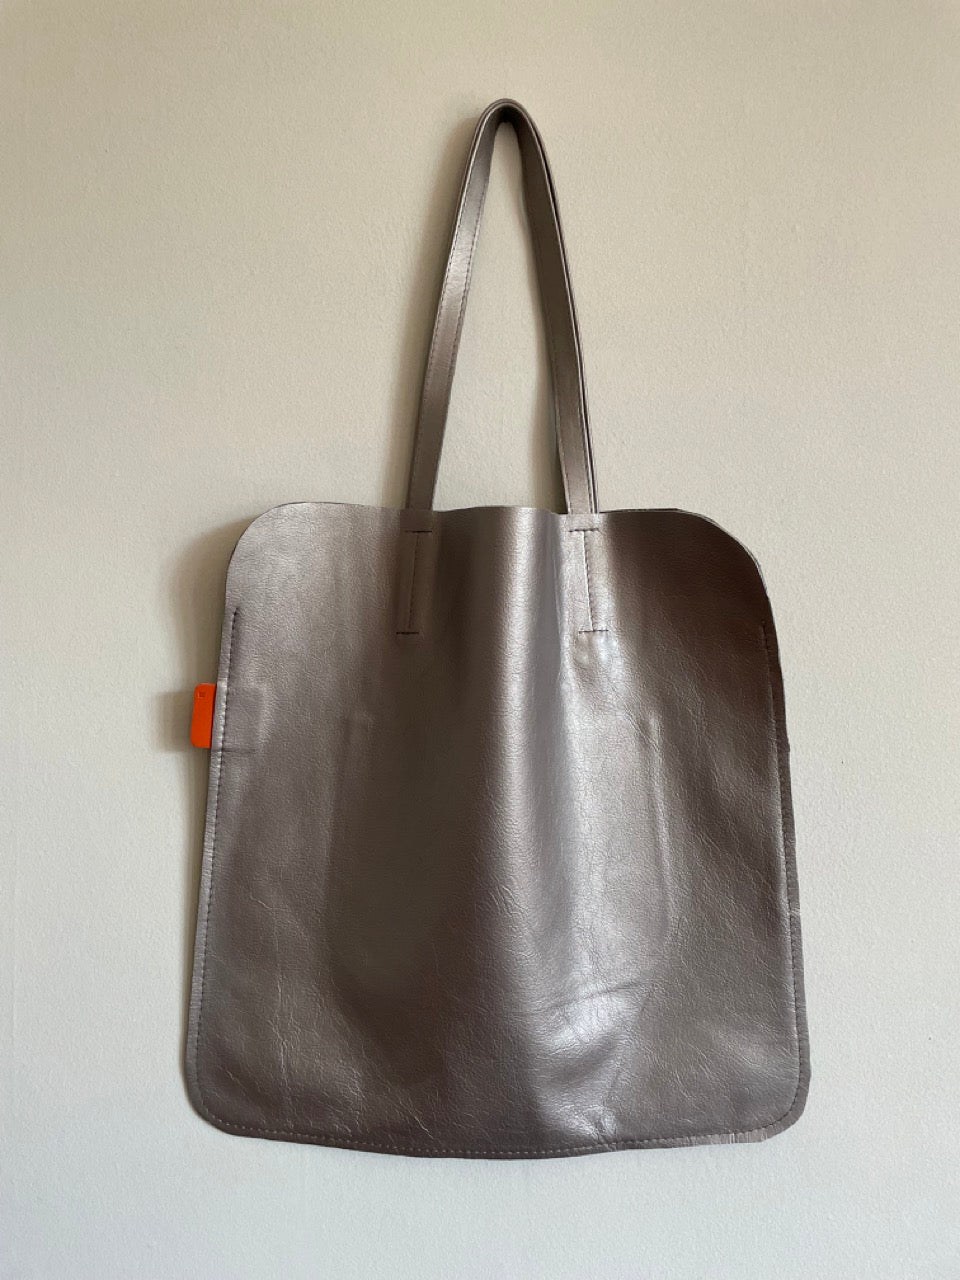 Marmalade Large Leather Tote Bag  45 x 45cm - Colour: Pewter